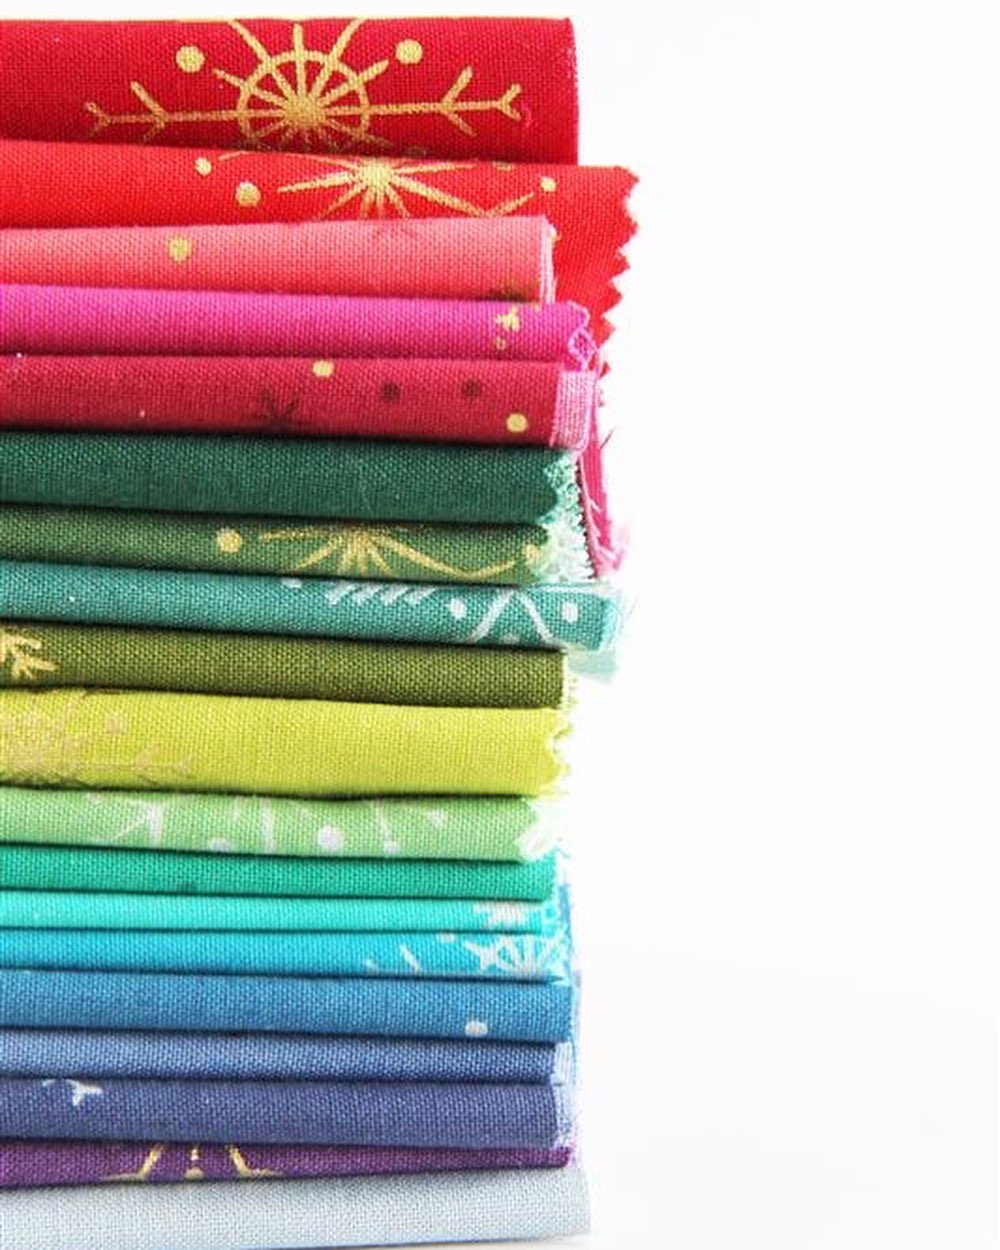 V & Co. Ombre Flurries • Fat Eighth Bundle • 16 Colors